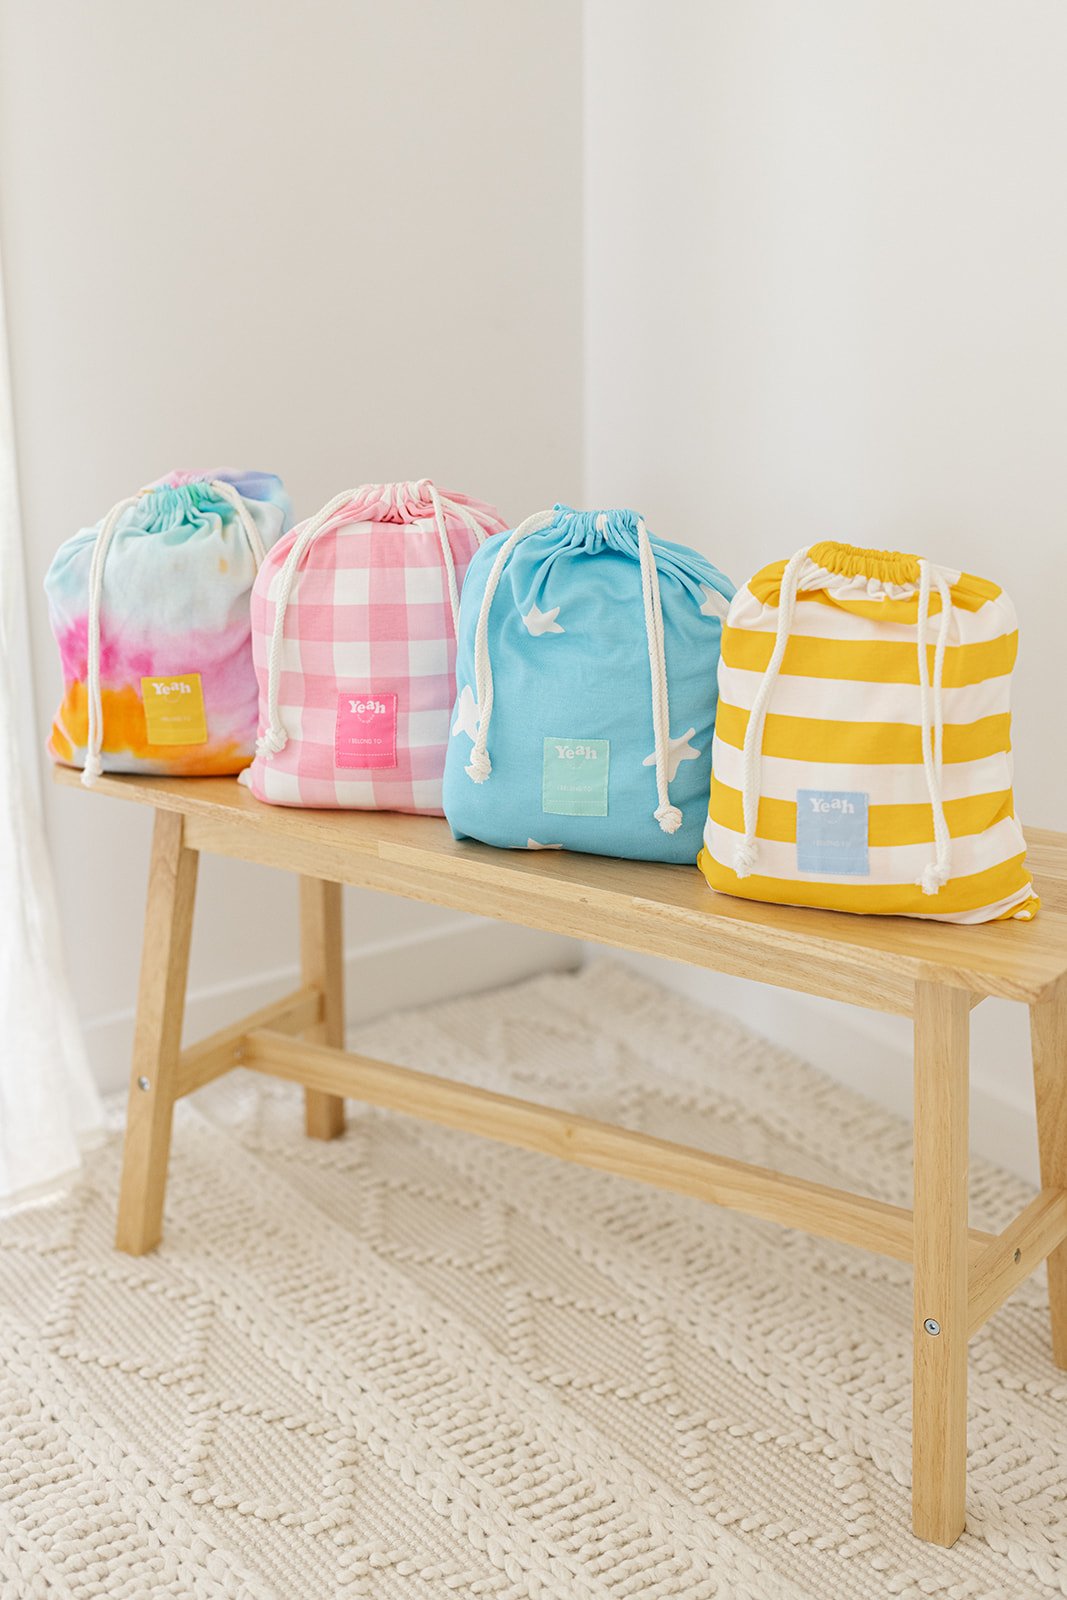 Product photos of daycare sleep bags by Brisbane brand Yeah the Kids